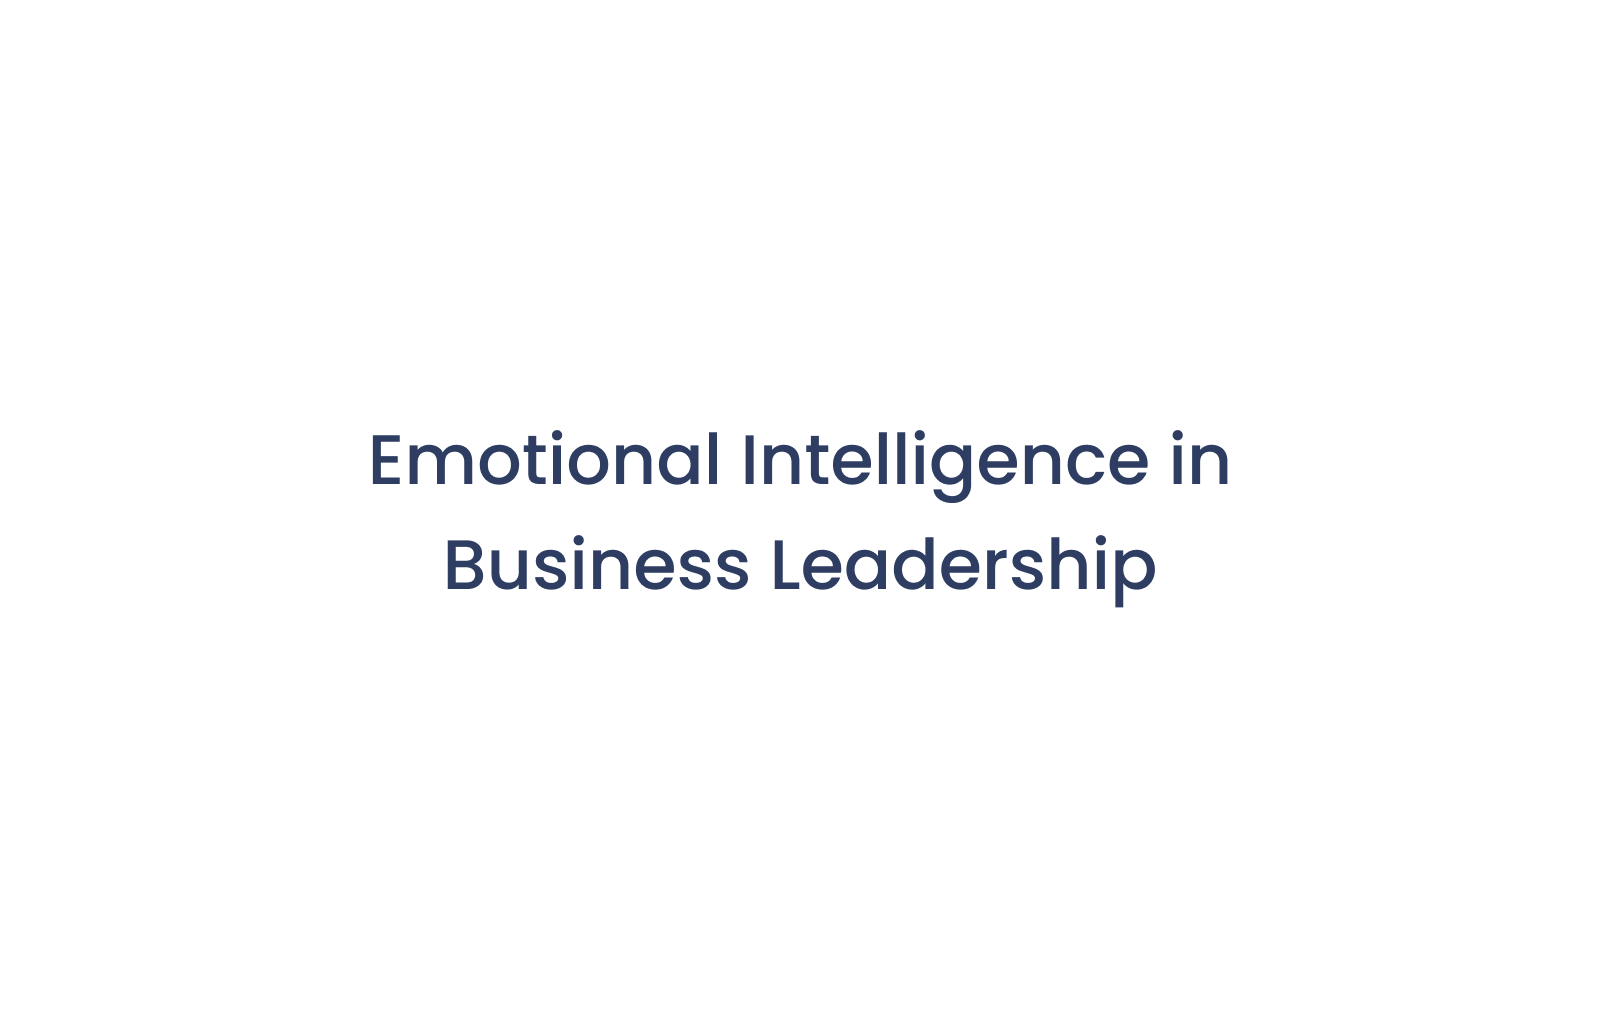 The Role of Emotional Intelligence in Business Leadership